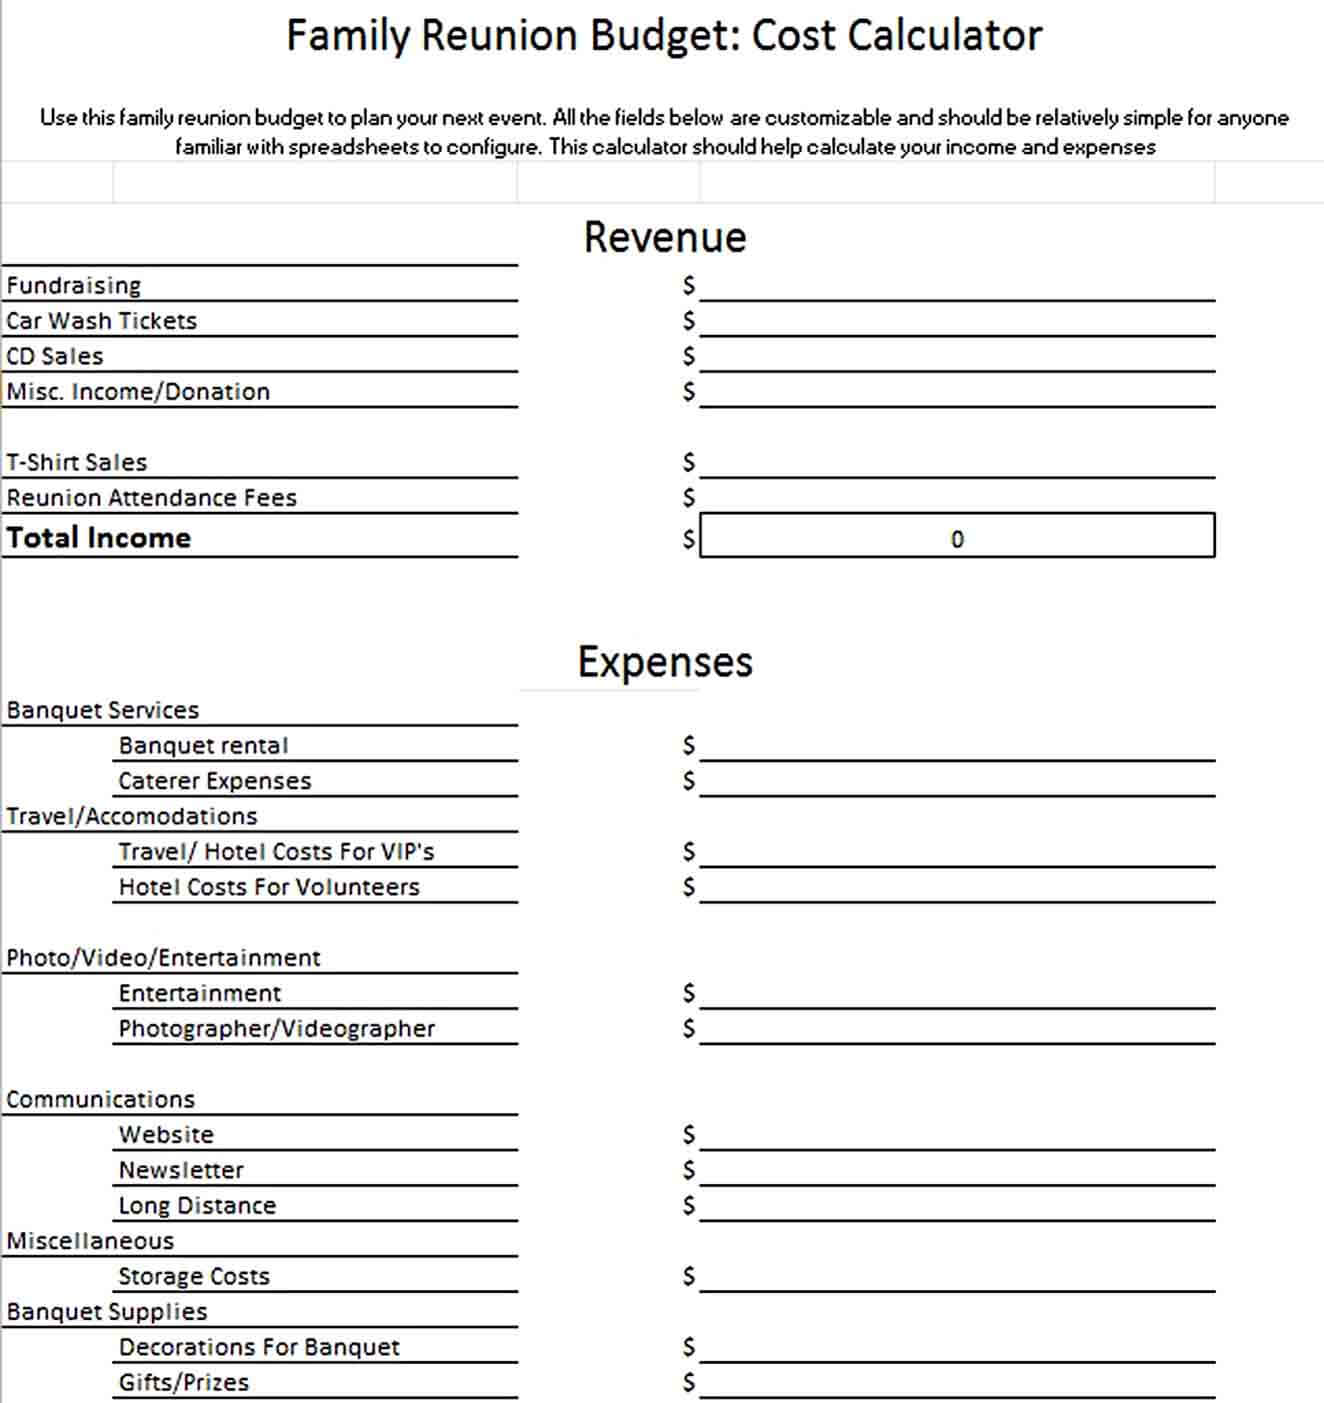 Family Reunion Budget Template in Excel